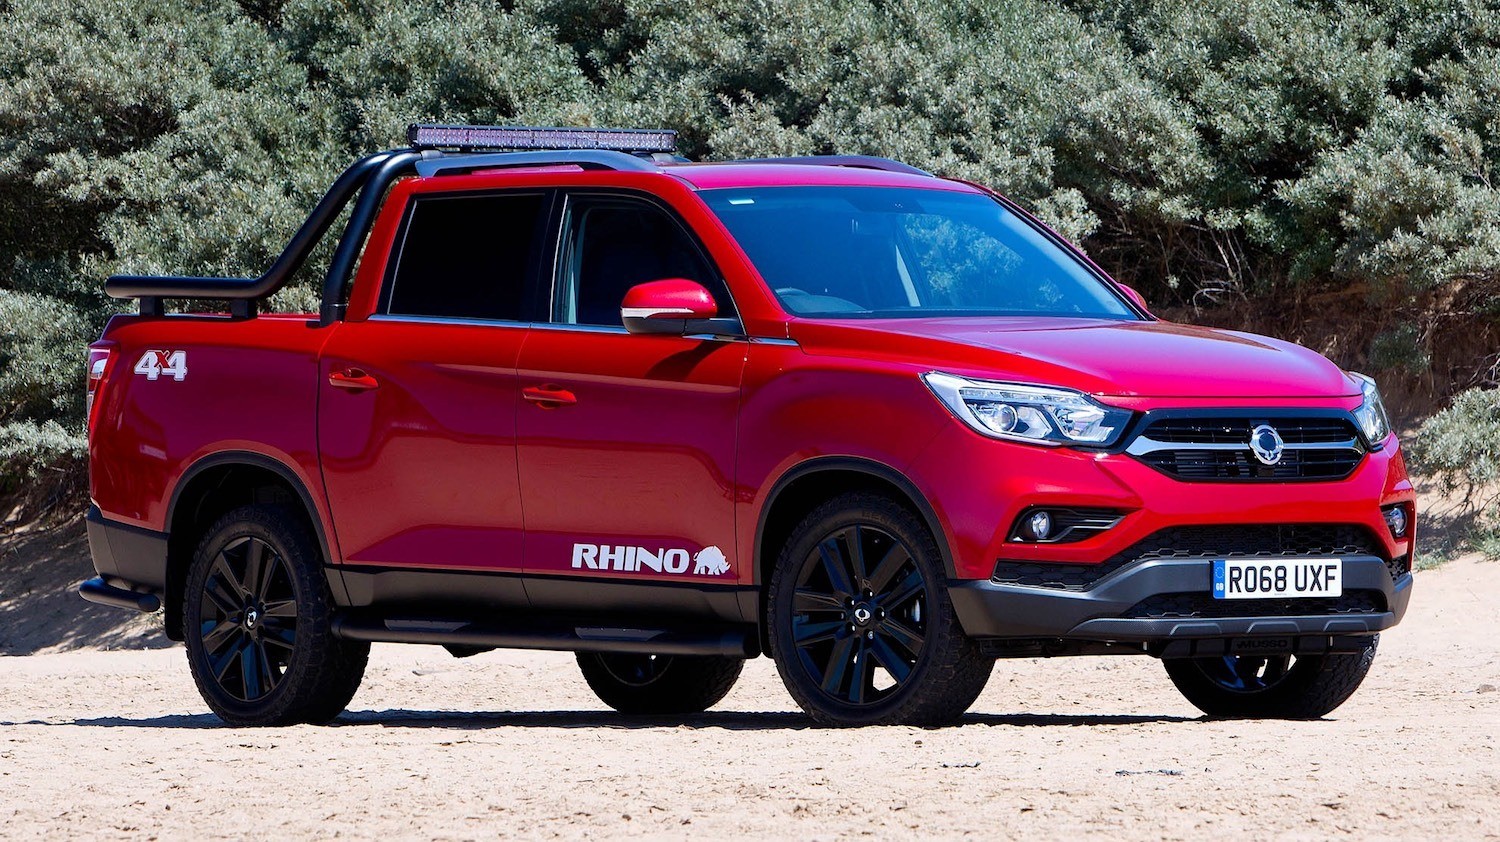 drive-Tim Barnes-Clay Carwrite-ups reviews the New SsangYong Musso Pick-Up 2018 7